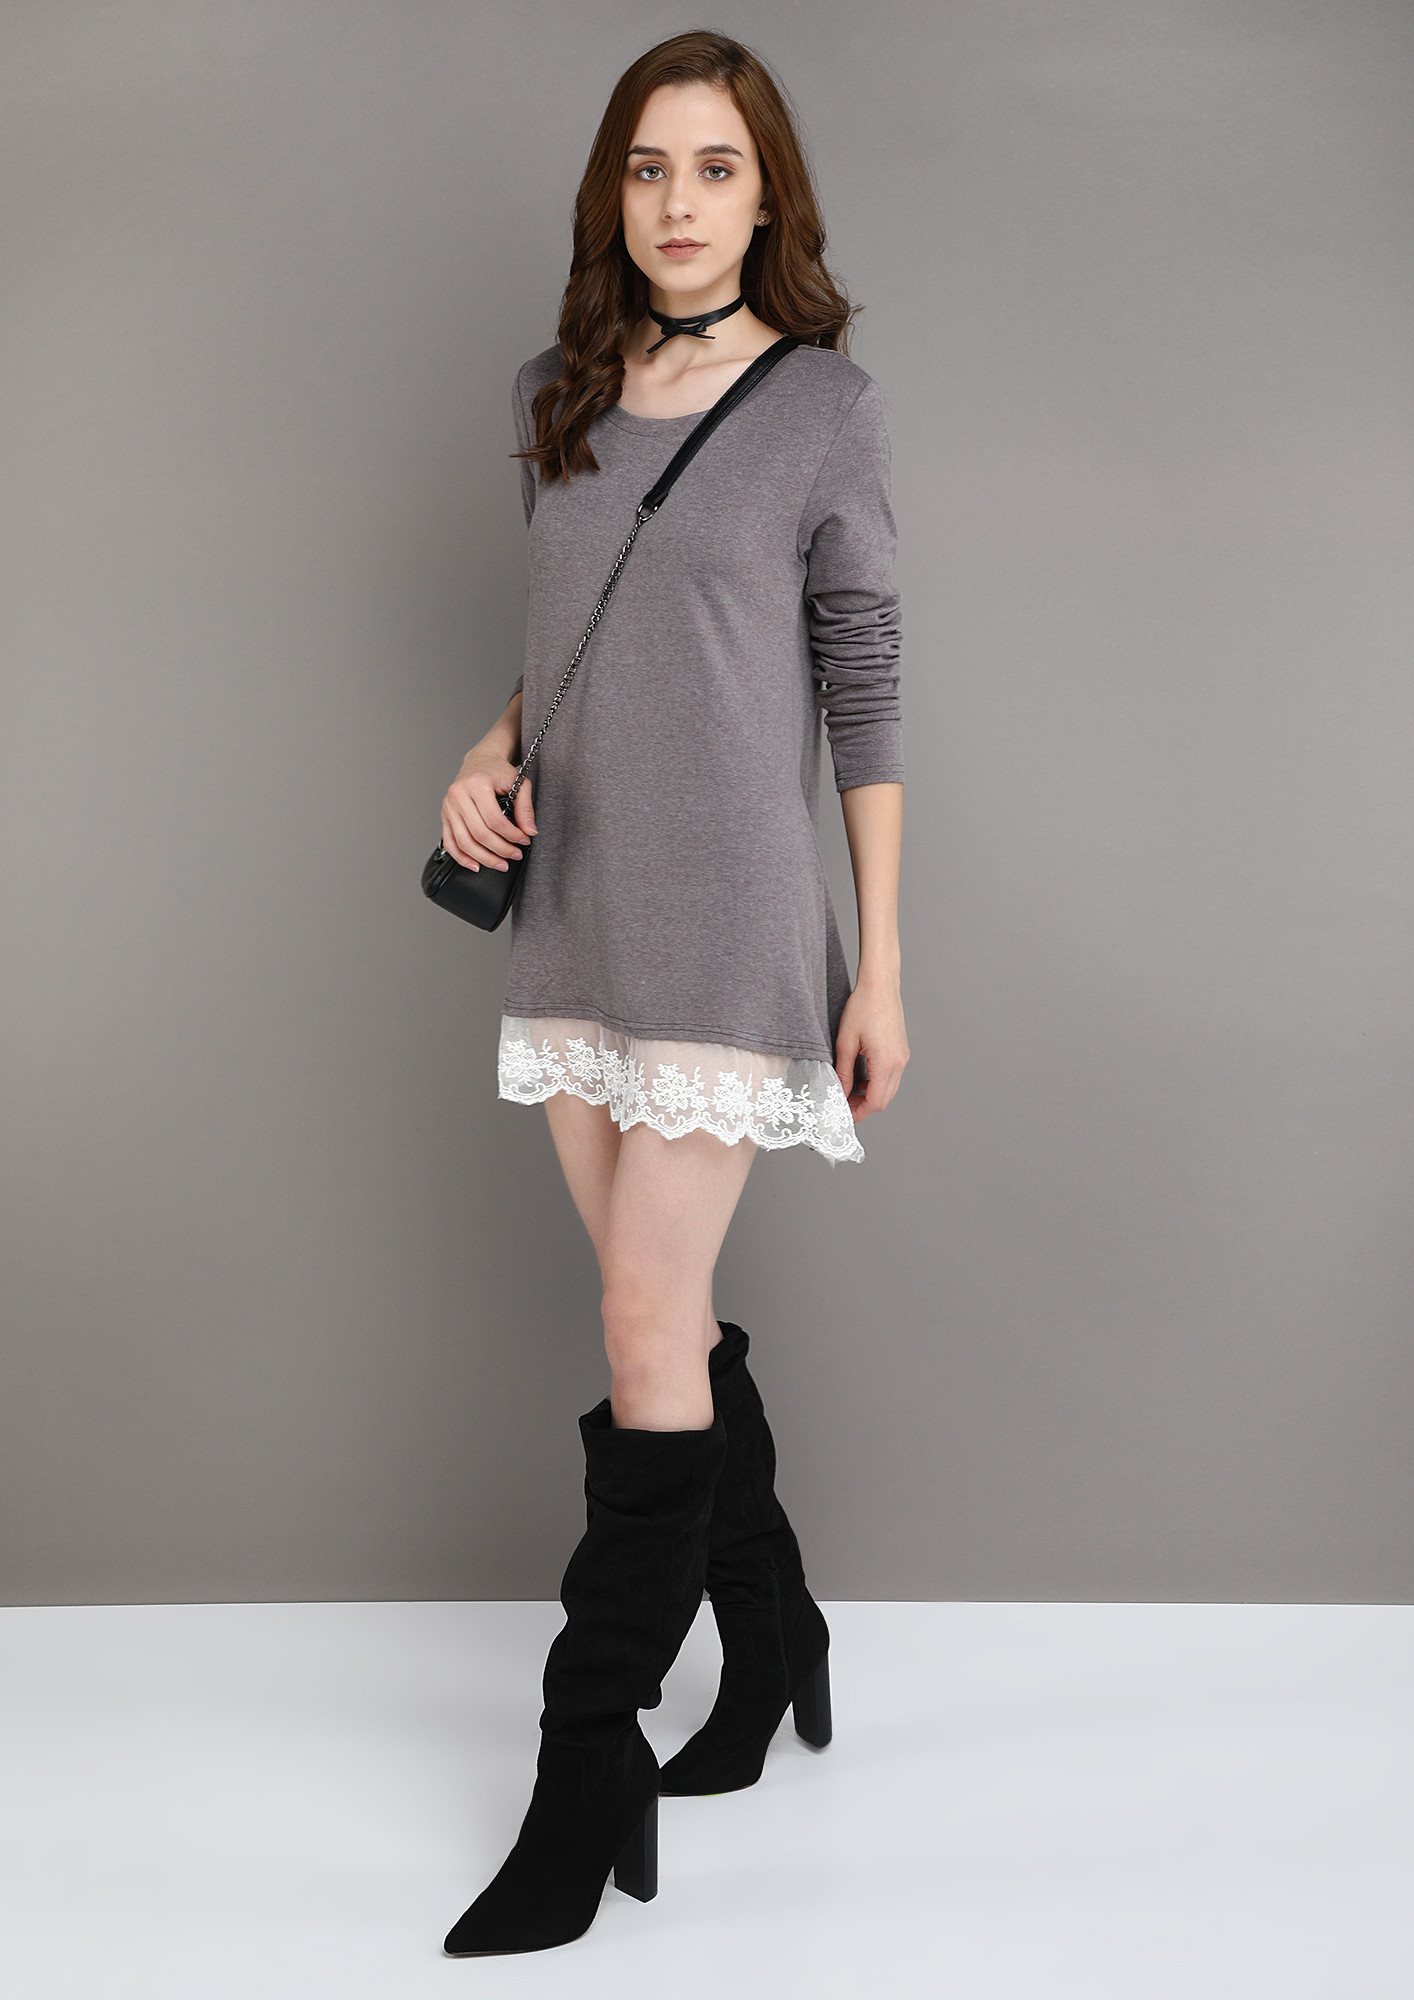 LACE ME UP GREY TUNIC TOP